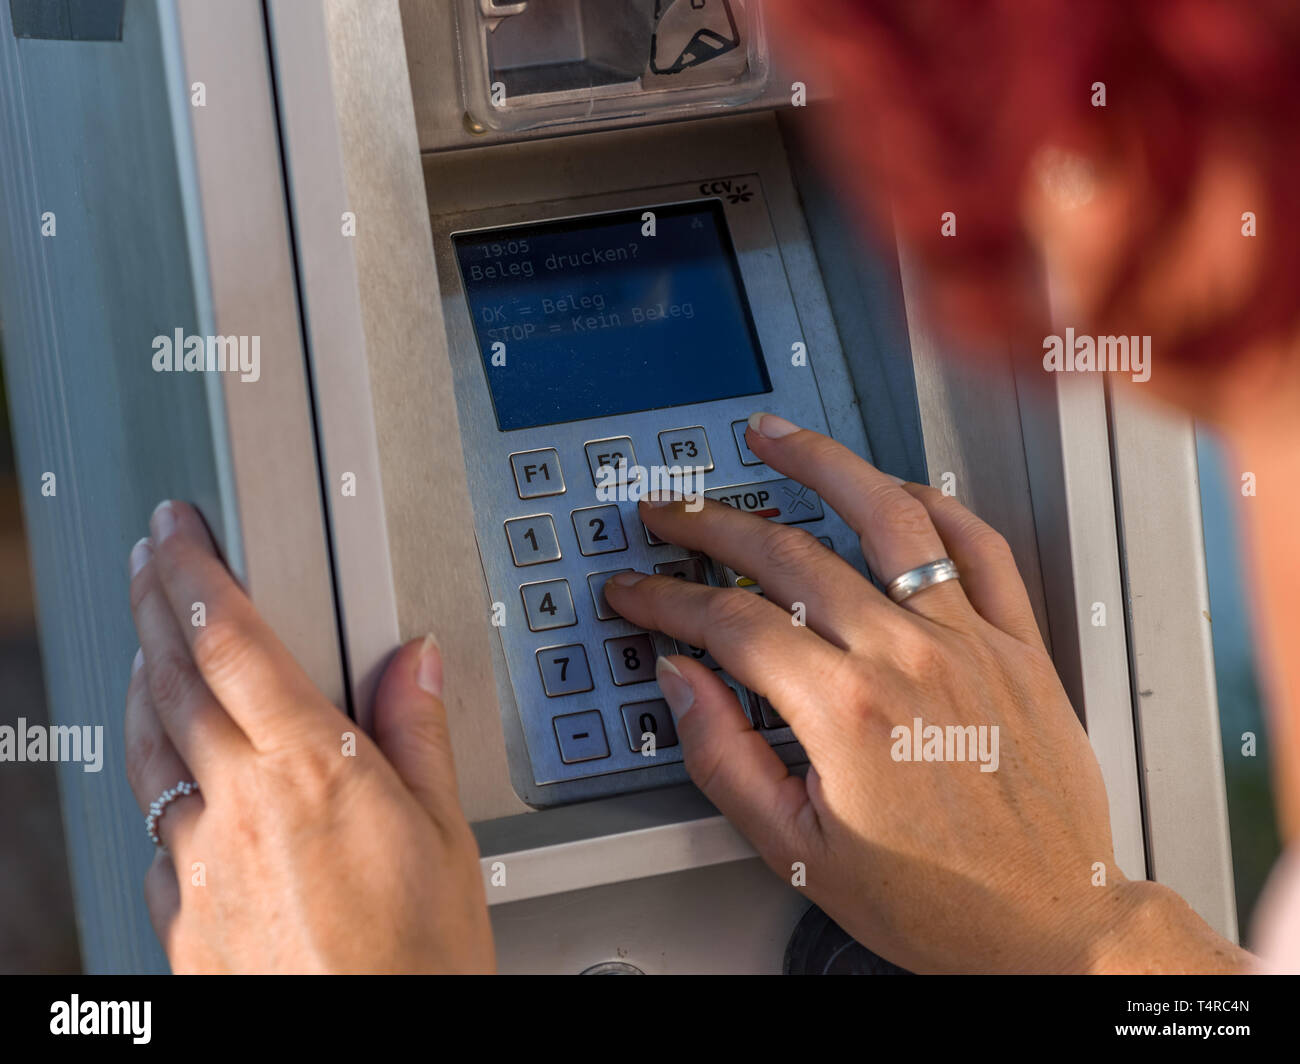 Leipzig, Germany. 17th July, 2018. A woman pays with her EC card at a terminal, taken on 17.07.2018 at a natural gas filling station in Leipzig. Credit: Thomas Schulze/dpa-Zentralbild/ZB/dpa/Alamy Live News Stock Photo